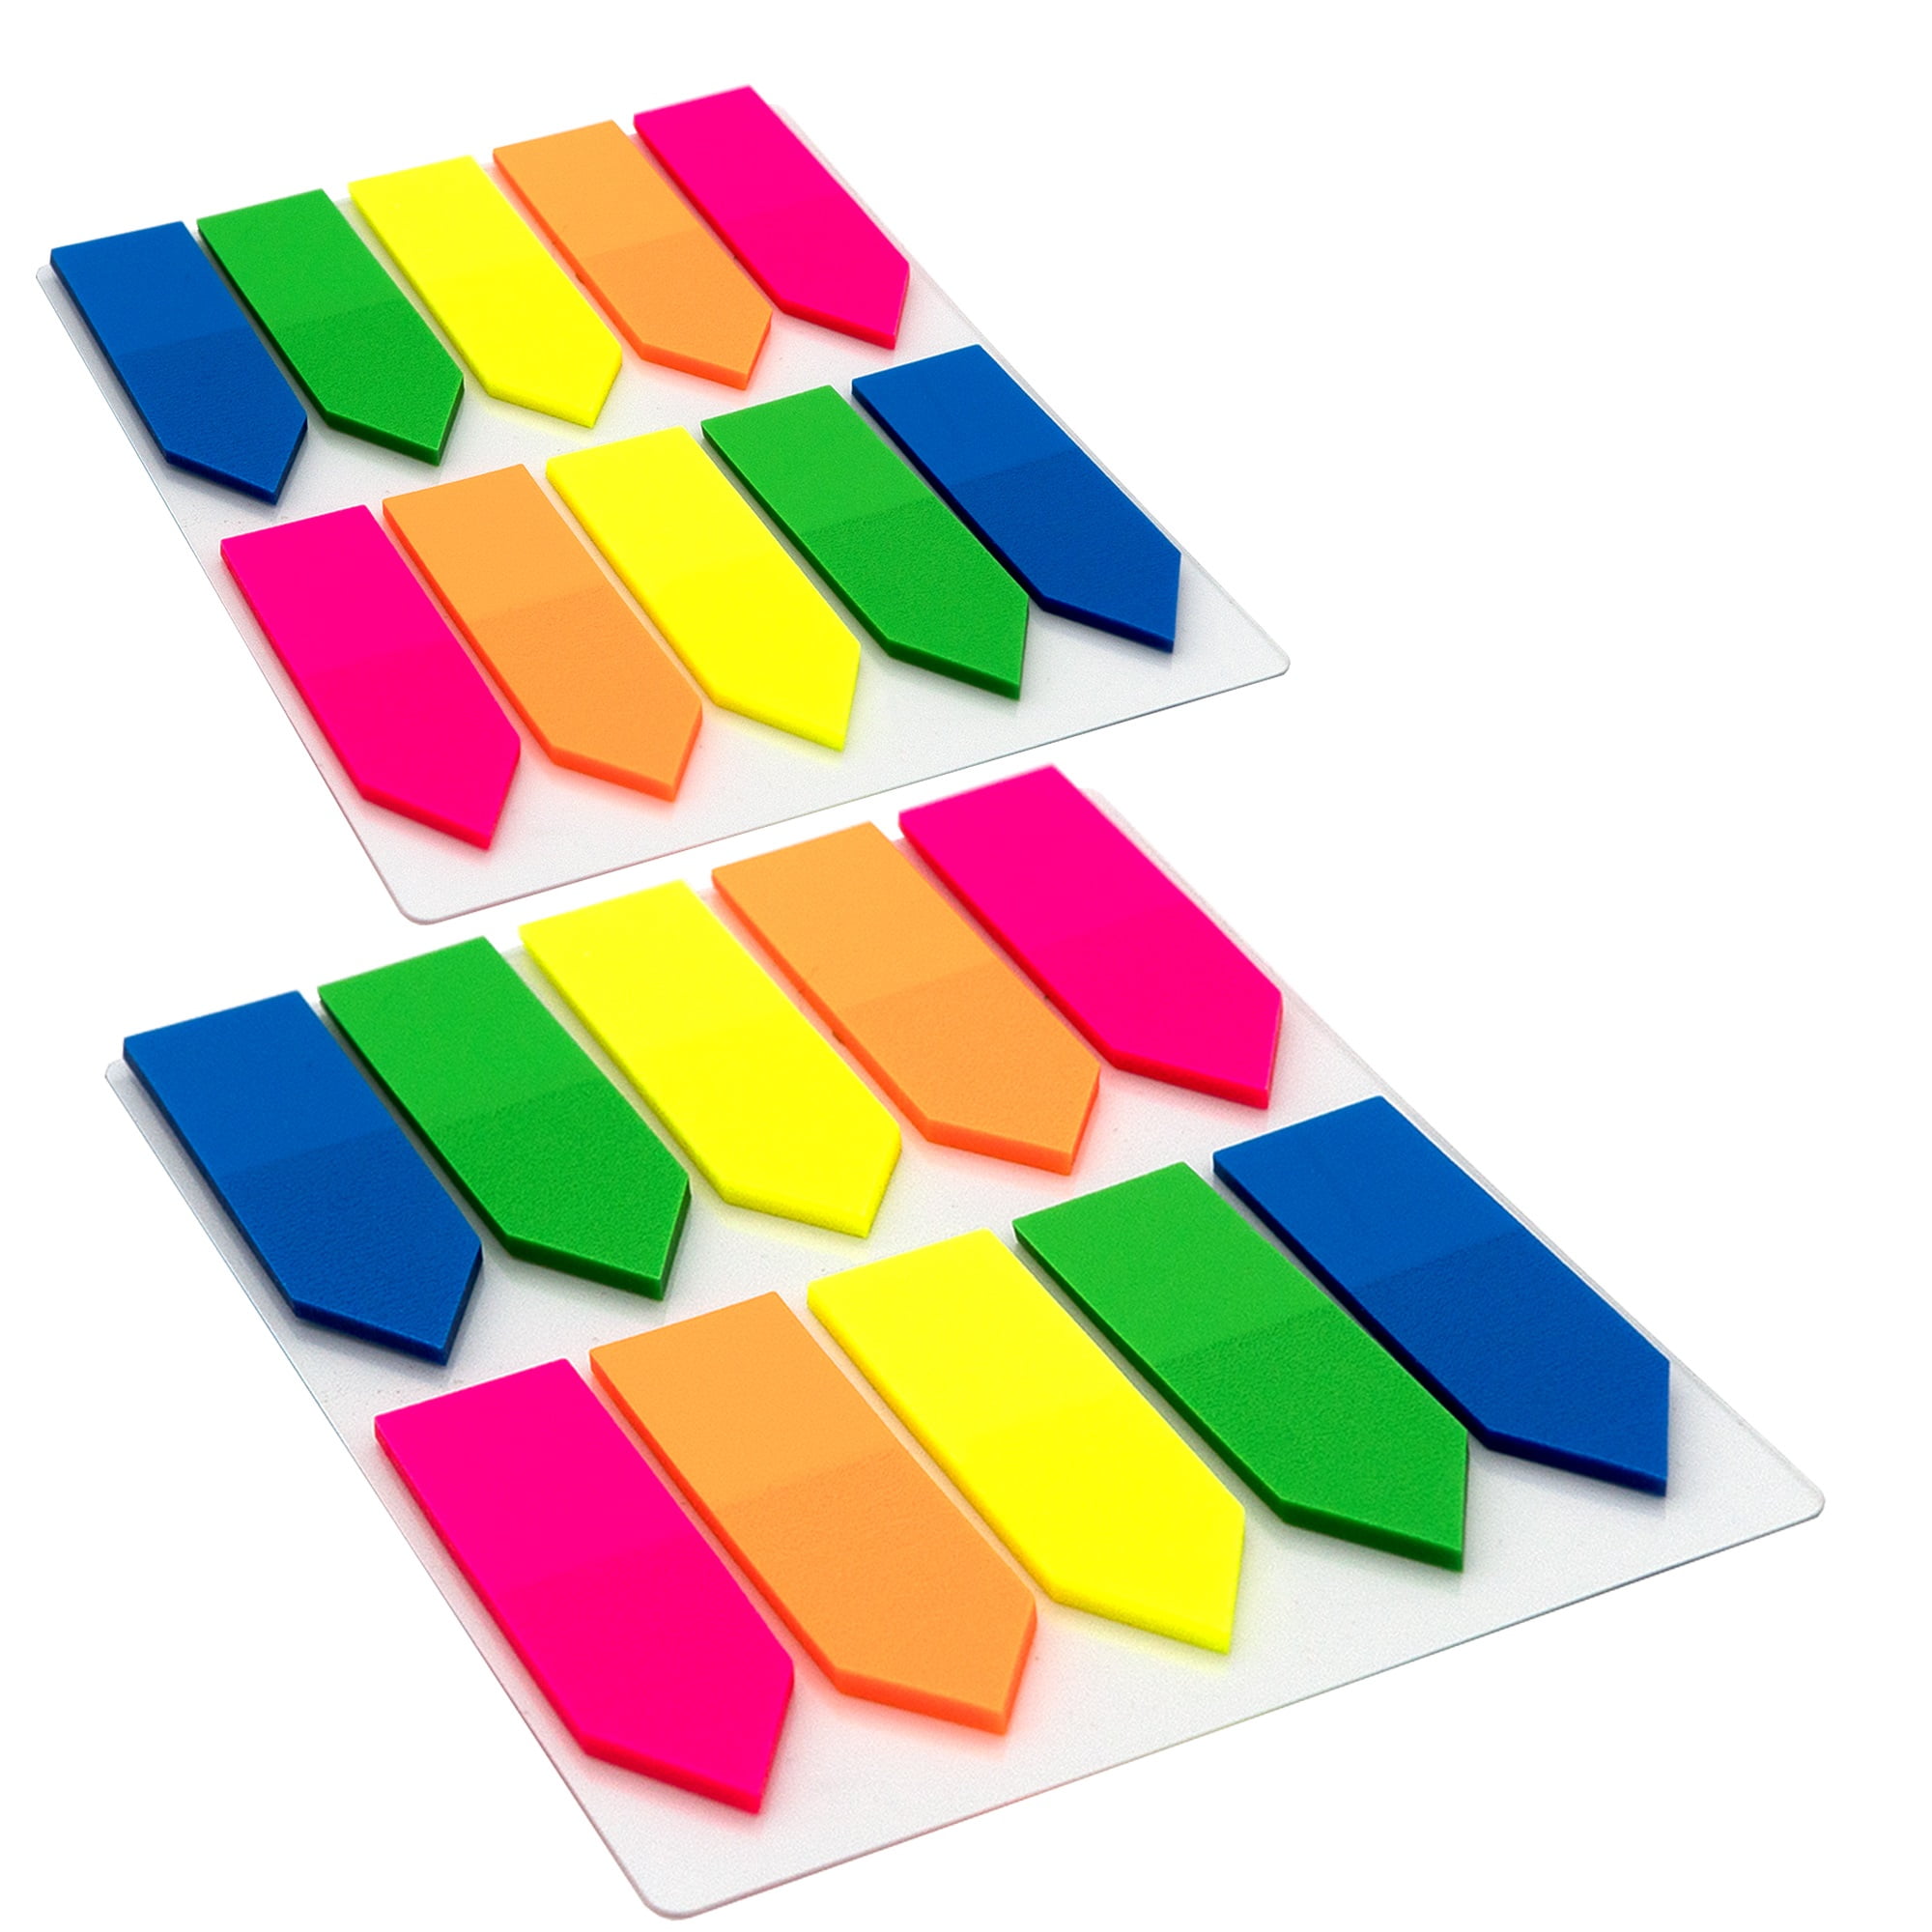 2x 35 index arrows Index Arrows 8 x 35 index tabs Self-adhesive page markers and document flags in assorted bright colours Post-it Index Strips